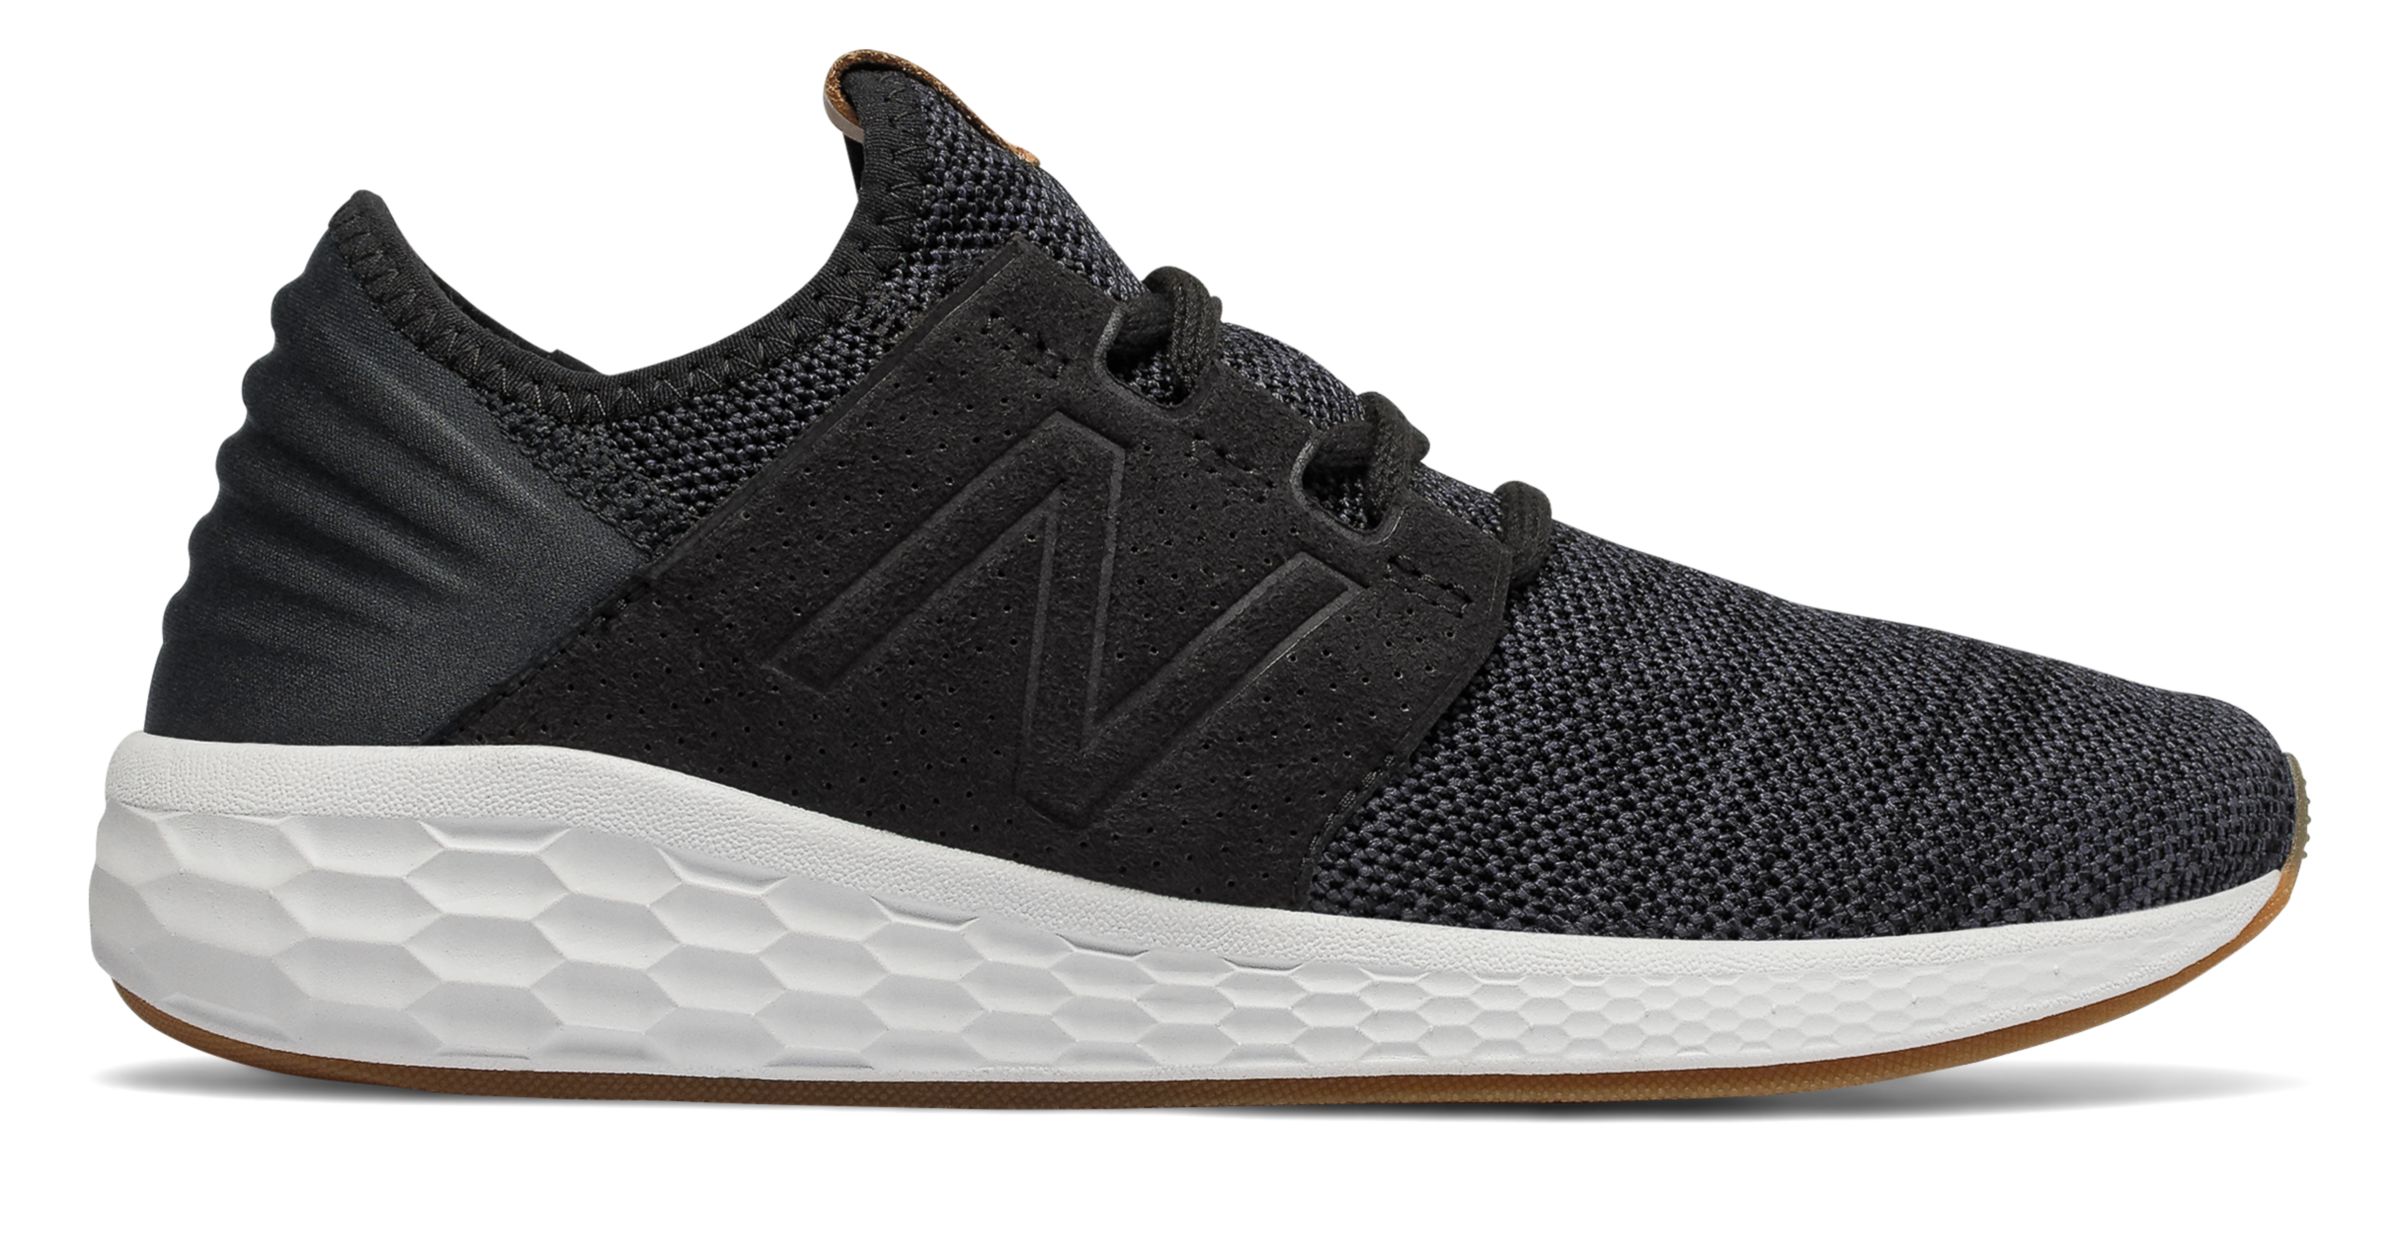 New Balance WCRUZ-V2K on Sale - Discounts Up to 64% Off on WCRUZKB2 at  Joe's New Balance Outlet